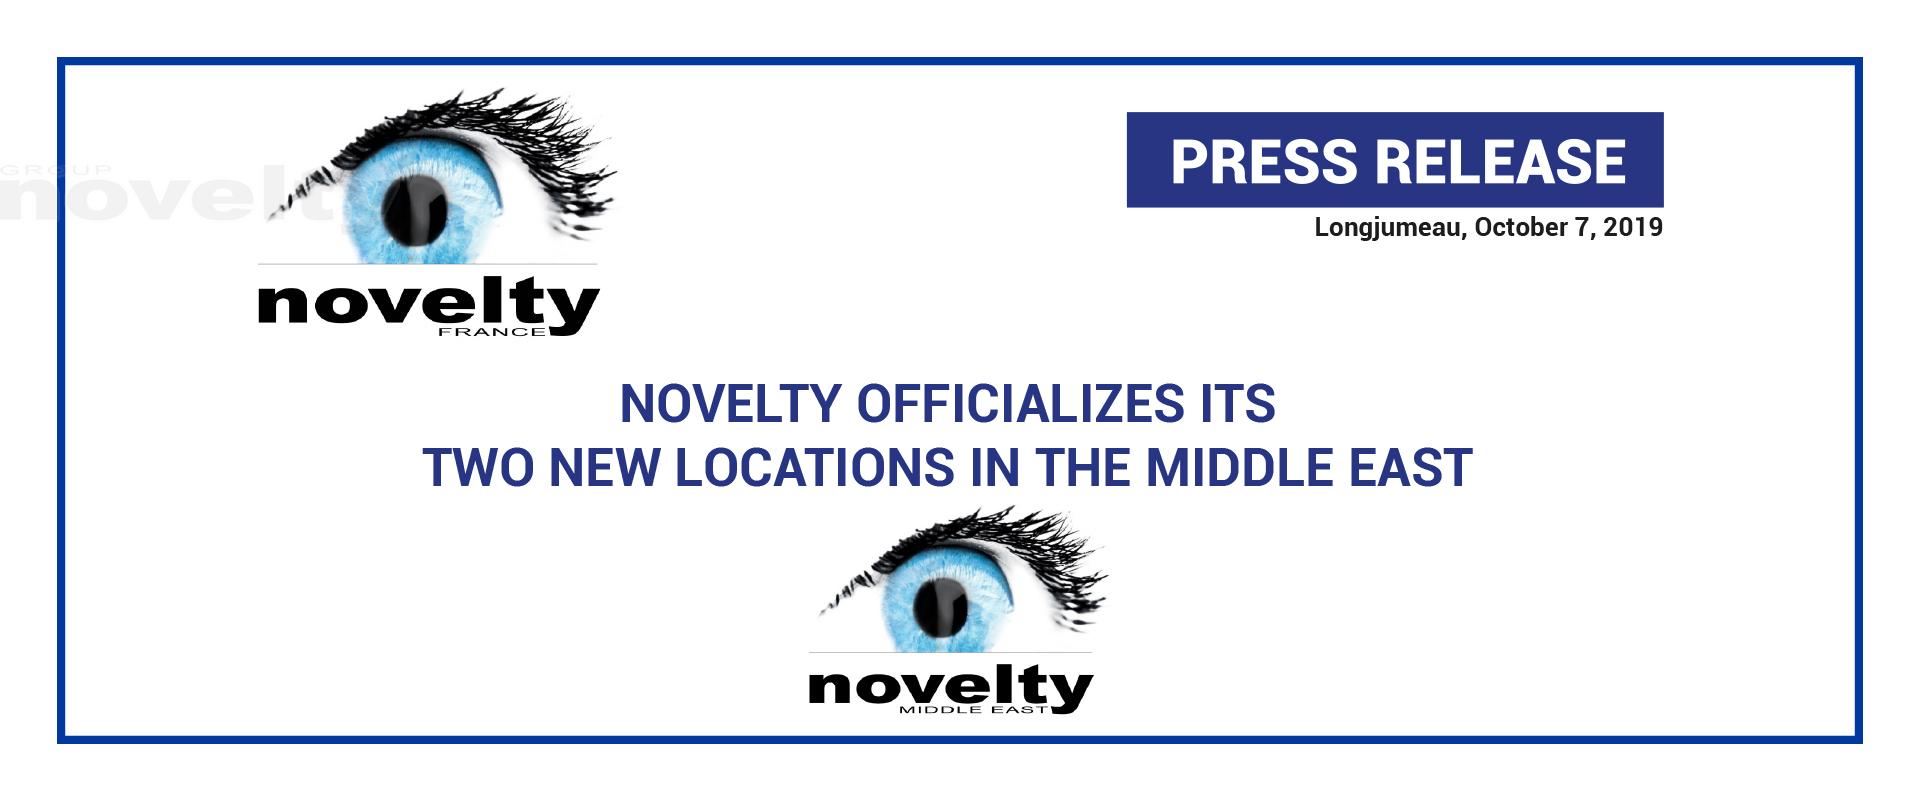 Visuel PRESS RELEASE | Novelty officializes its two new locations in the Middle East